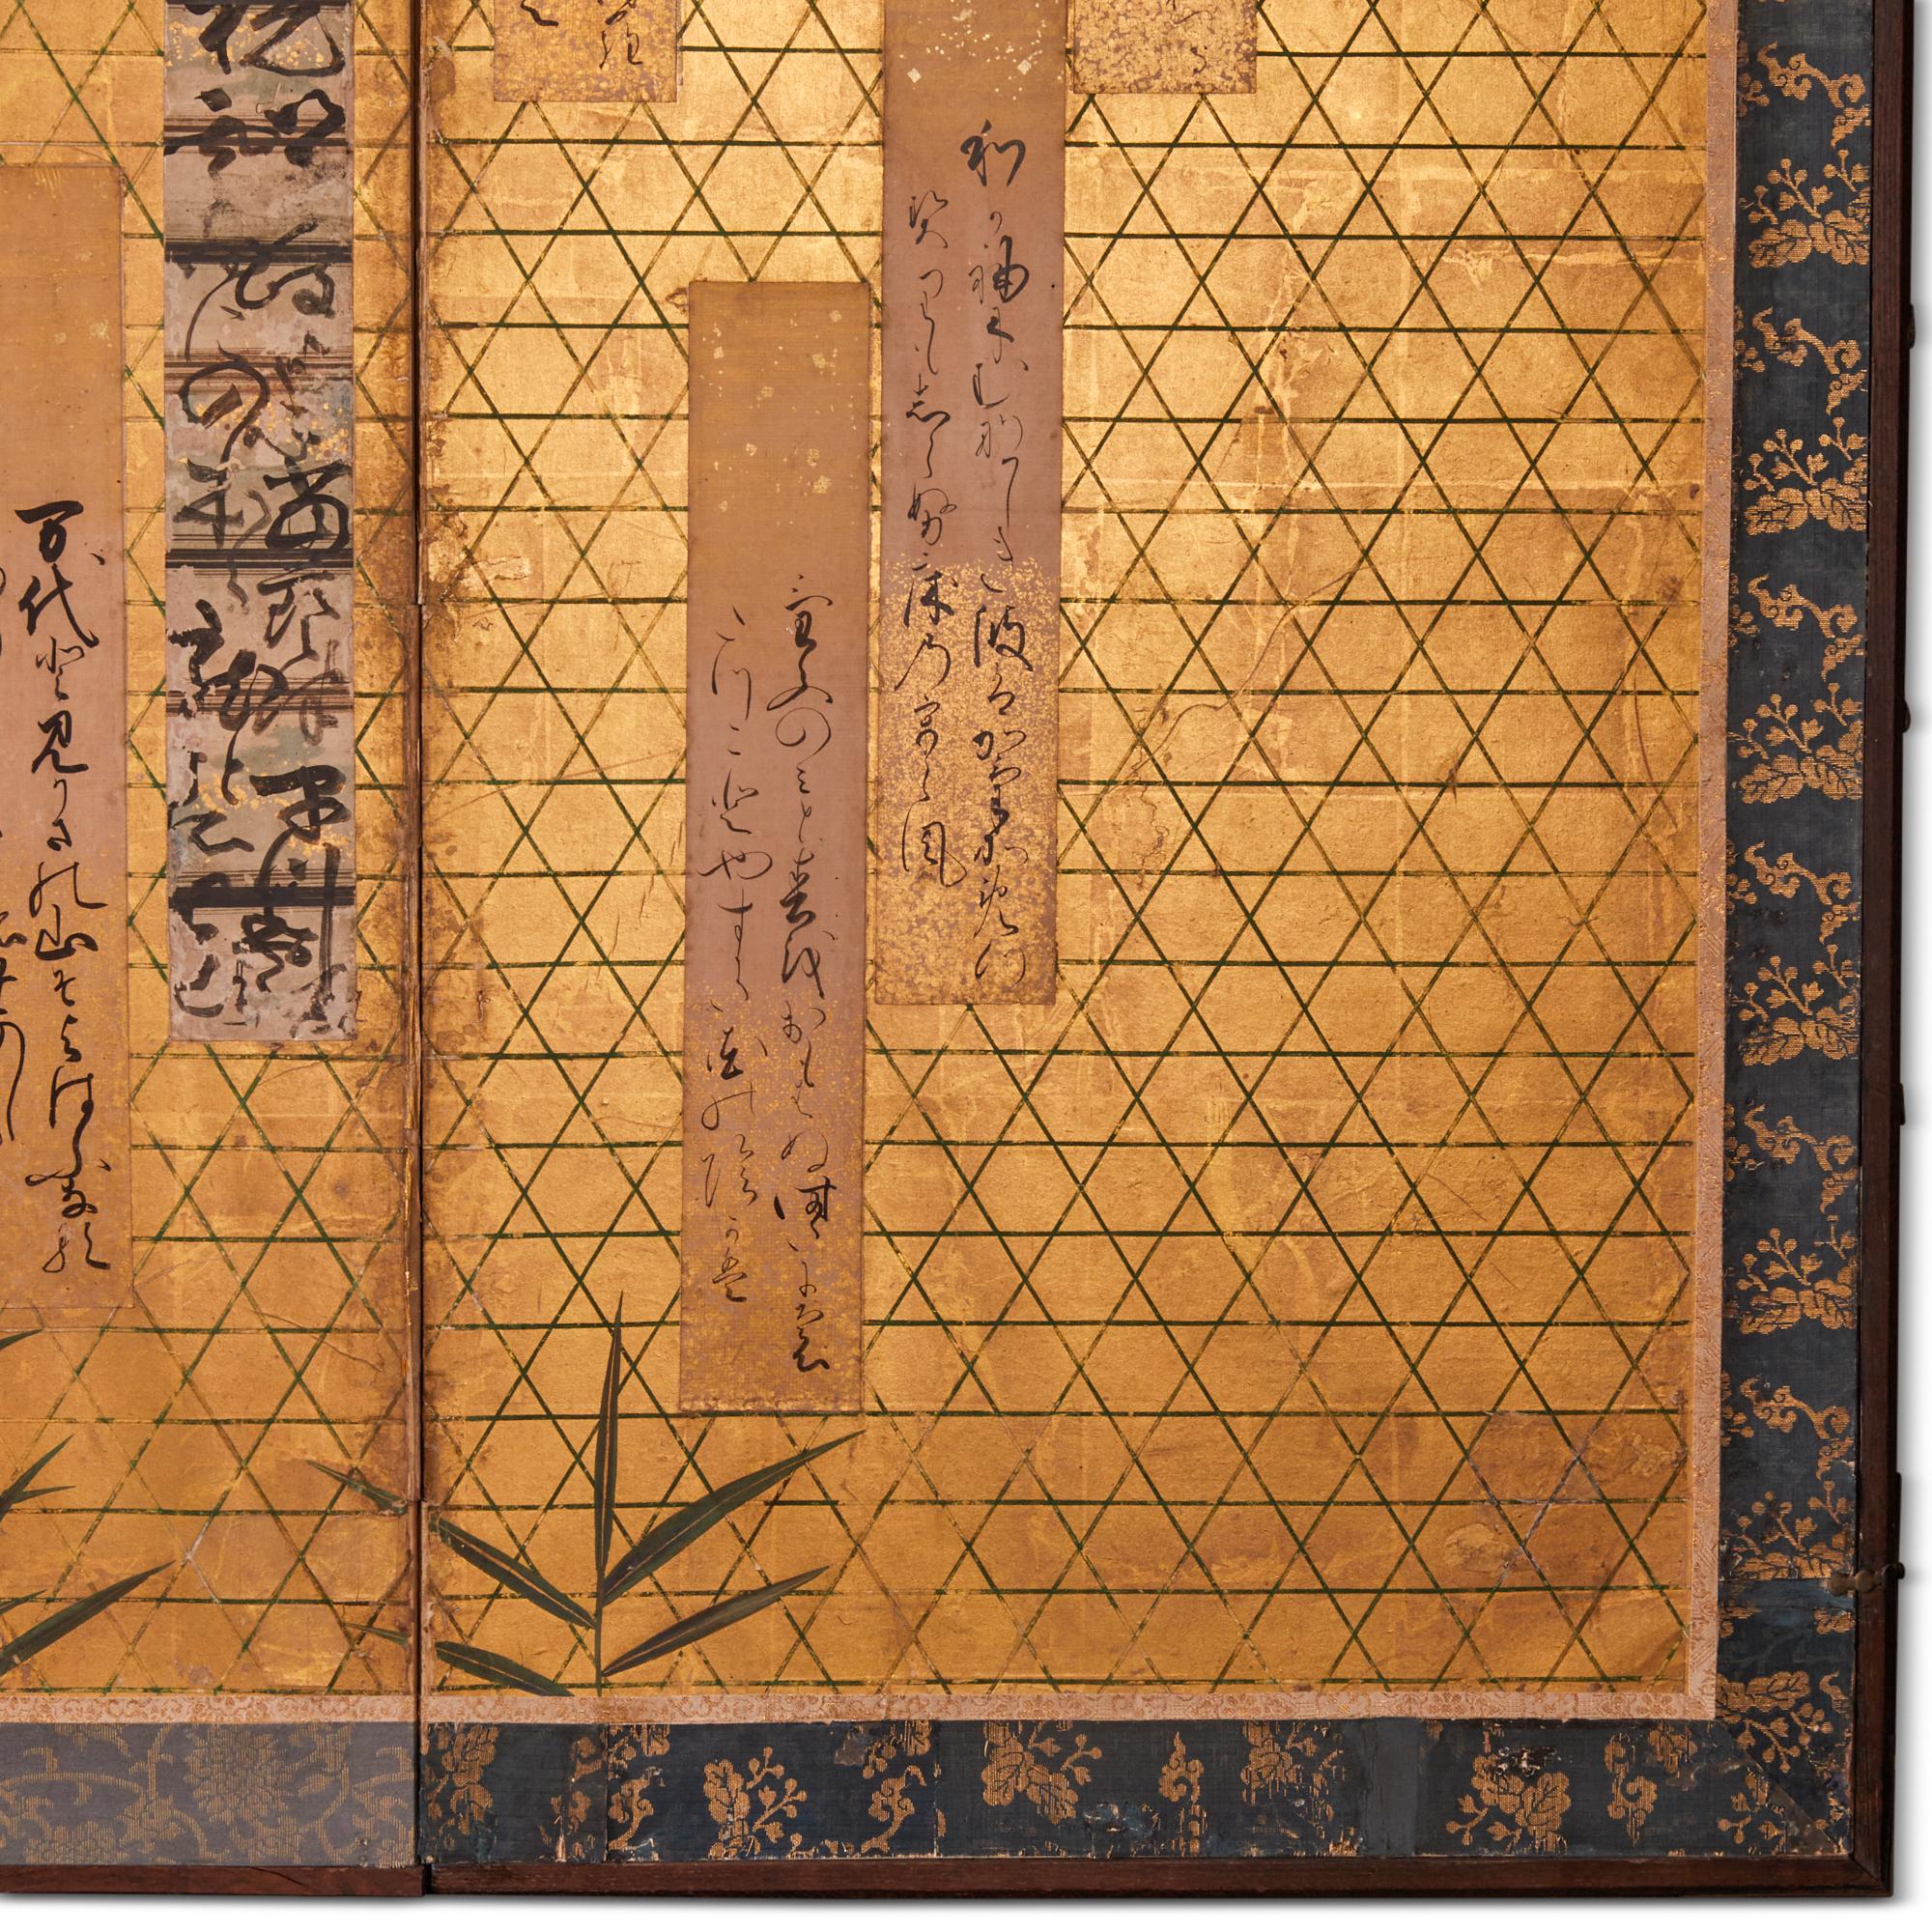 Ribbons of 17th century calligraphy poems are mounted on an 18th century screen with a woven bamboo motif.  These poems are aristocratic Waka poems (longer than haiku) from the anthology titled “Shin Chokusen Waka shu”. Which were written by